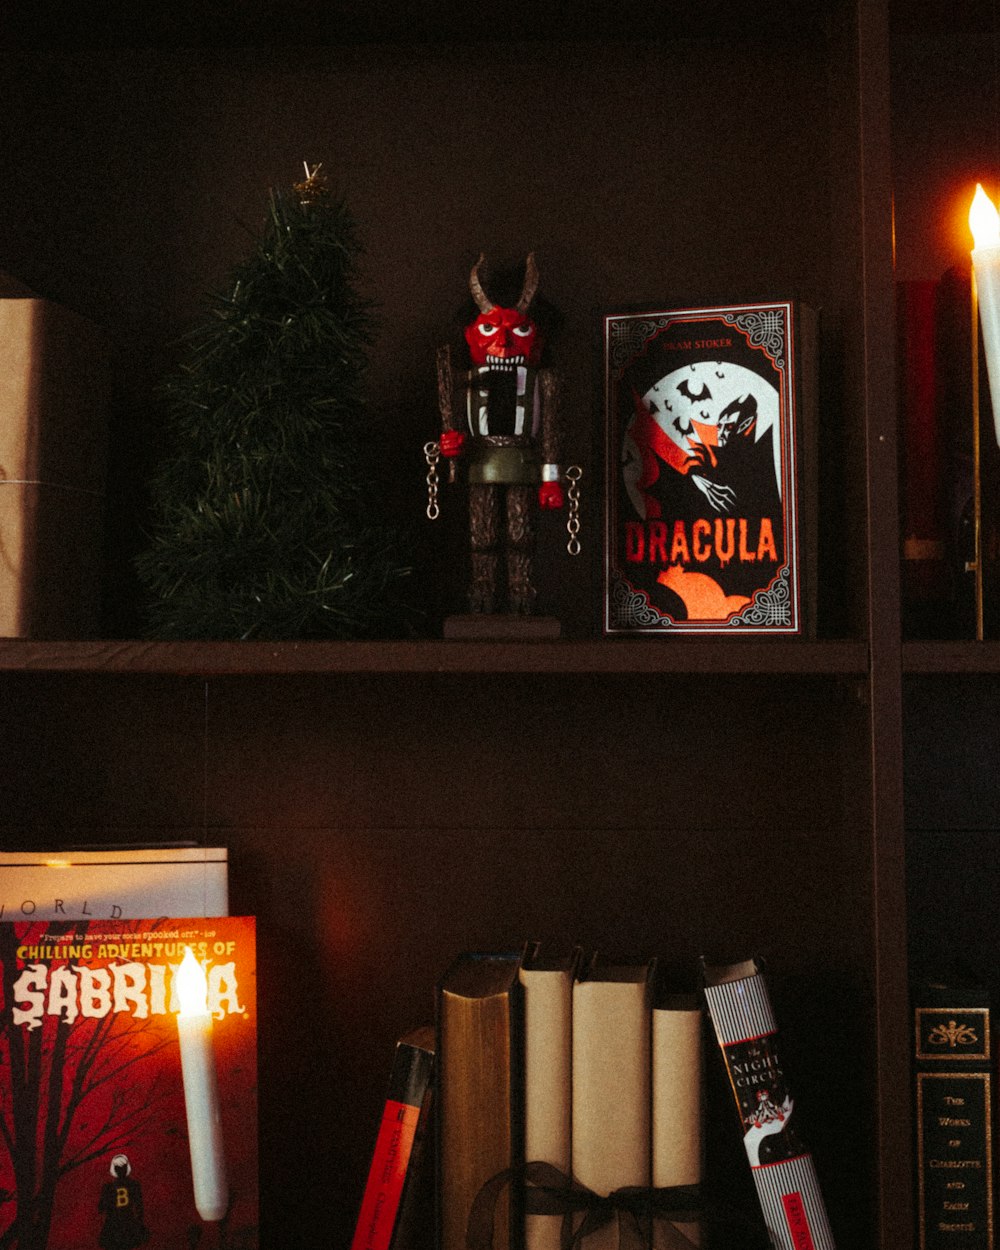 a shelf with books, candles, and other items on it